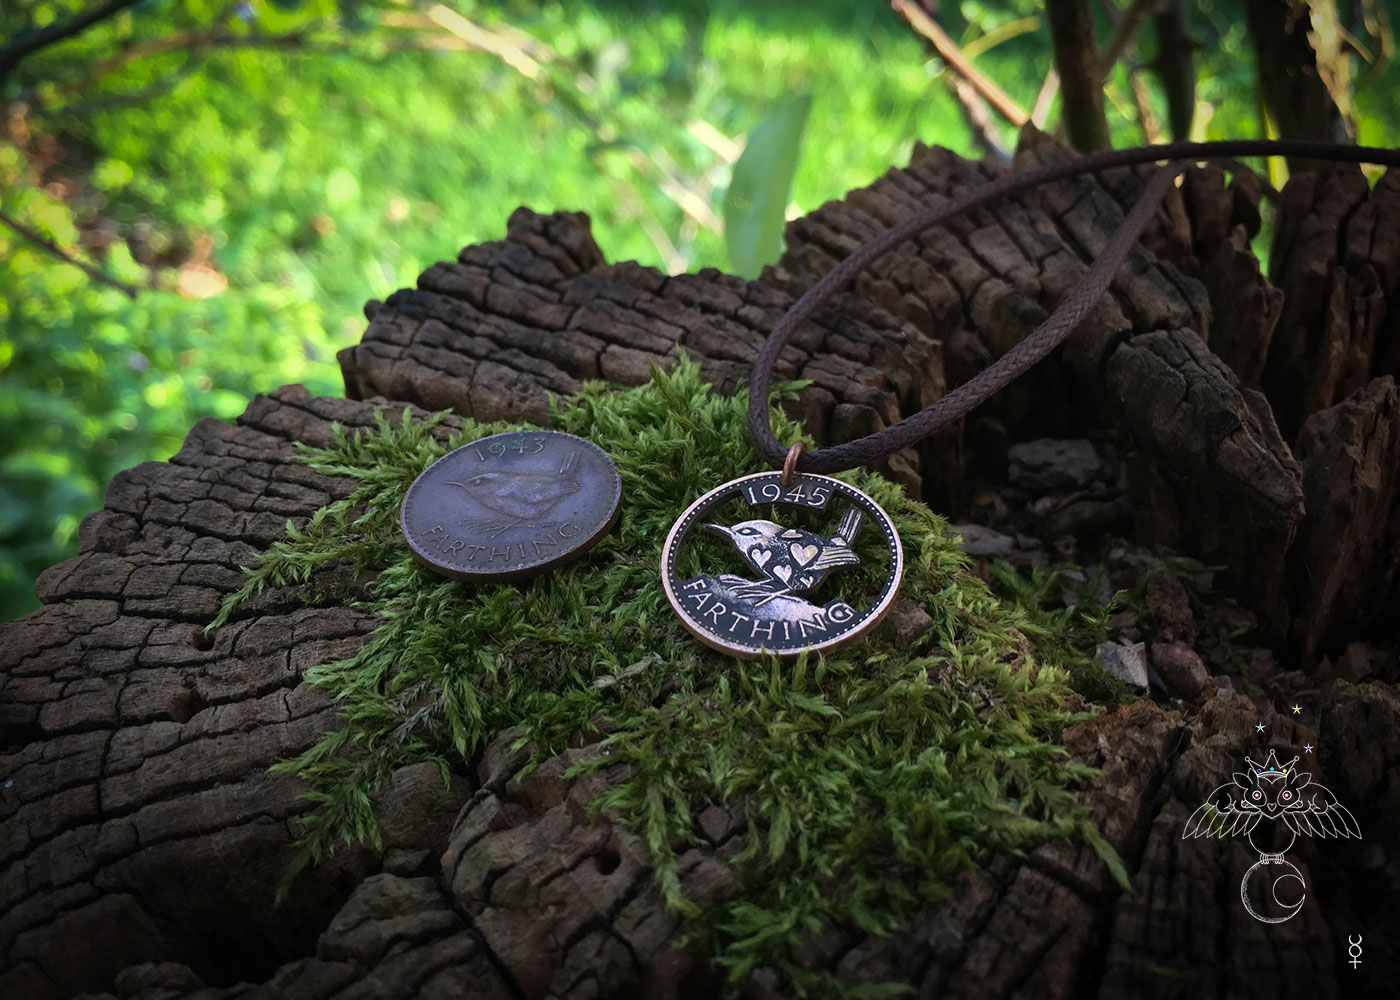 Hand cut, carved and engraved Jenny Wren Farthing coin pendant necklace made in the Hg workshop